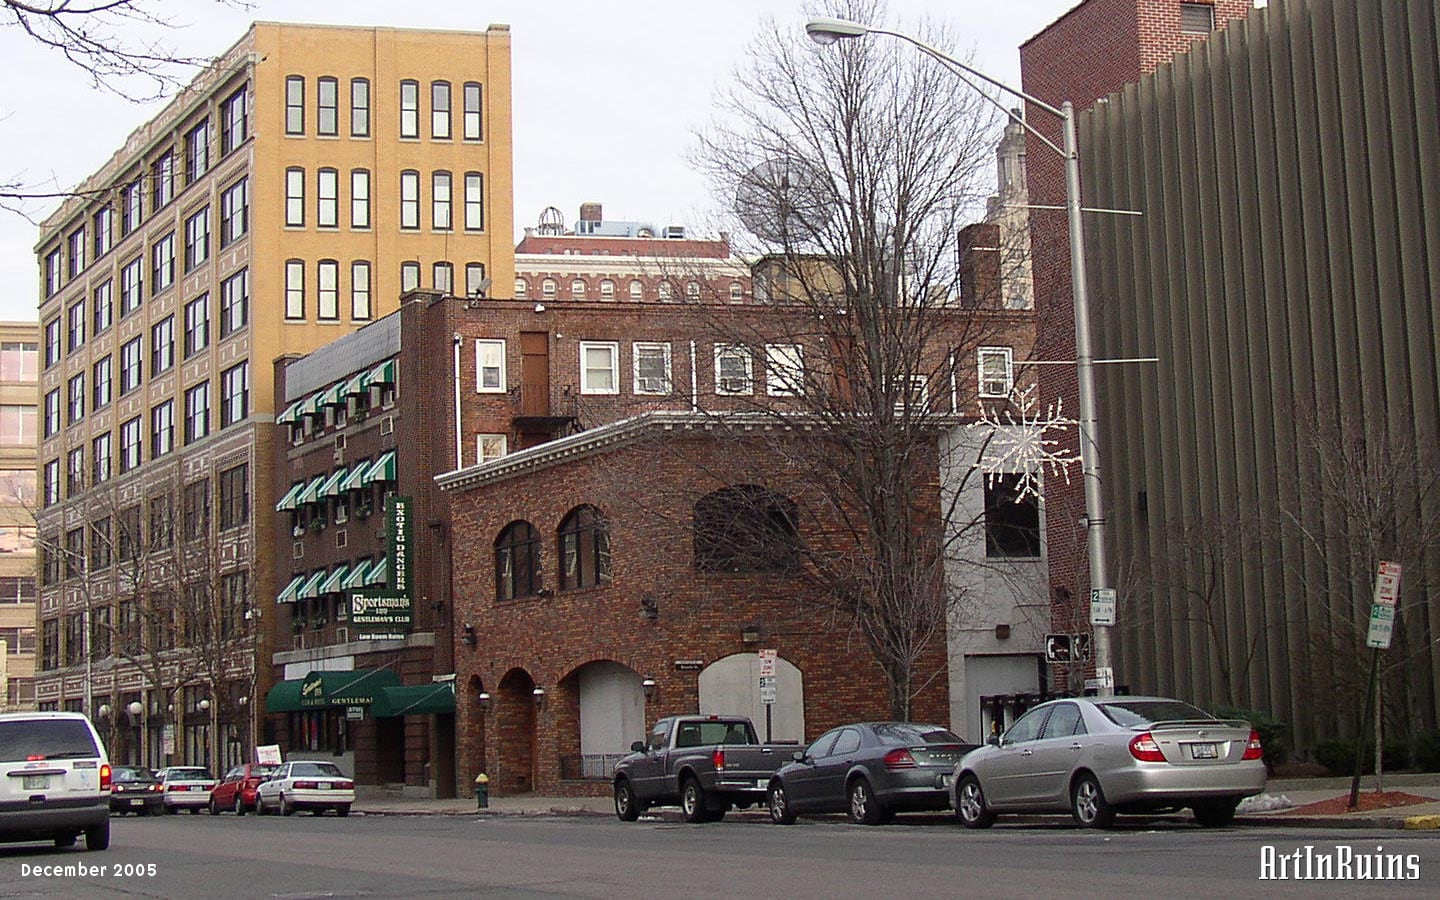 A two-story red brick facade with painted concrete block behind. Windows and door openings on the facade have arched lintels. Windows on the ground floor have been closed up with plywood.